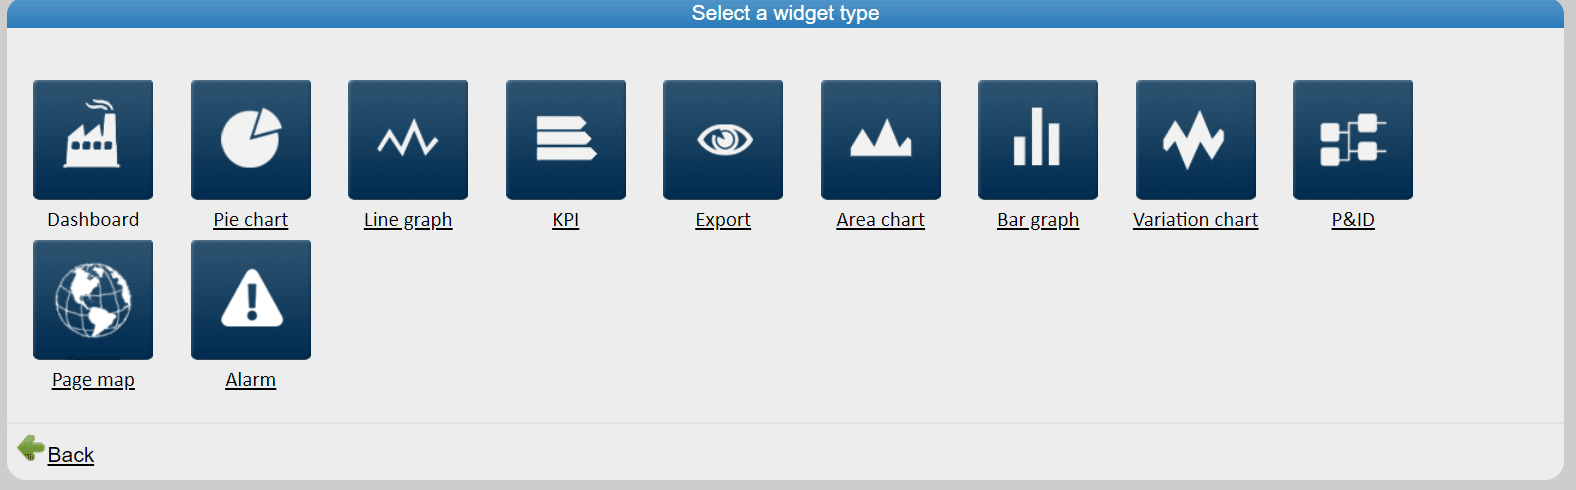 VPVision type of widget overview page